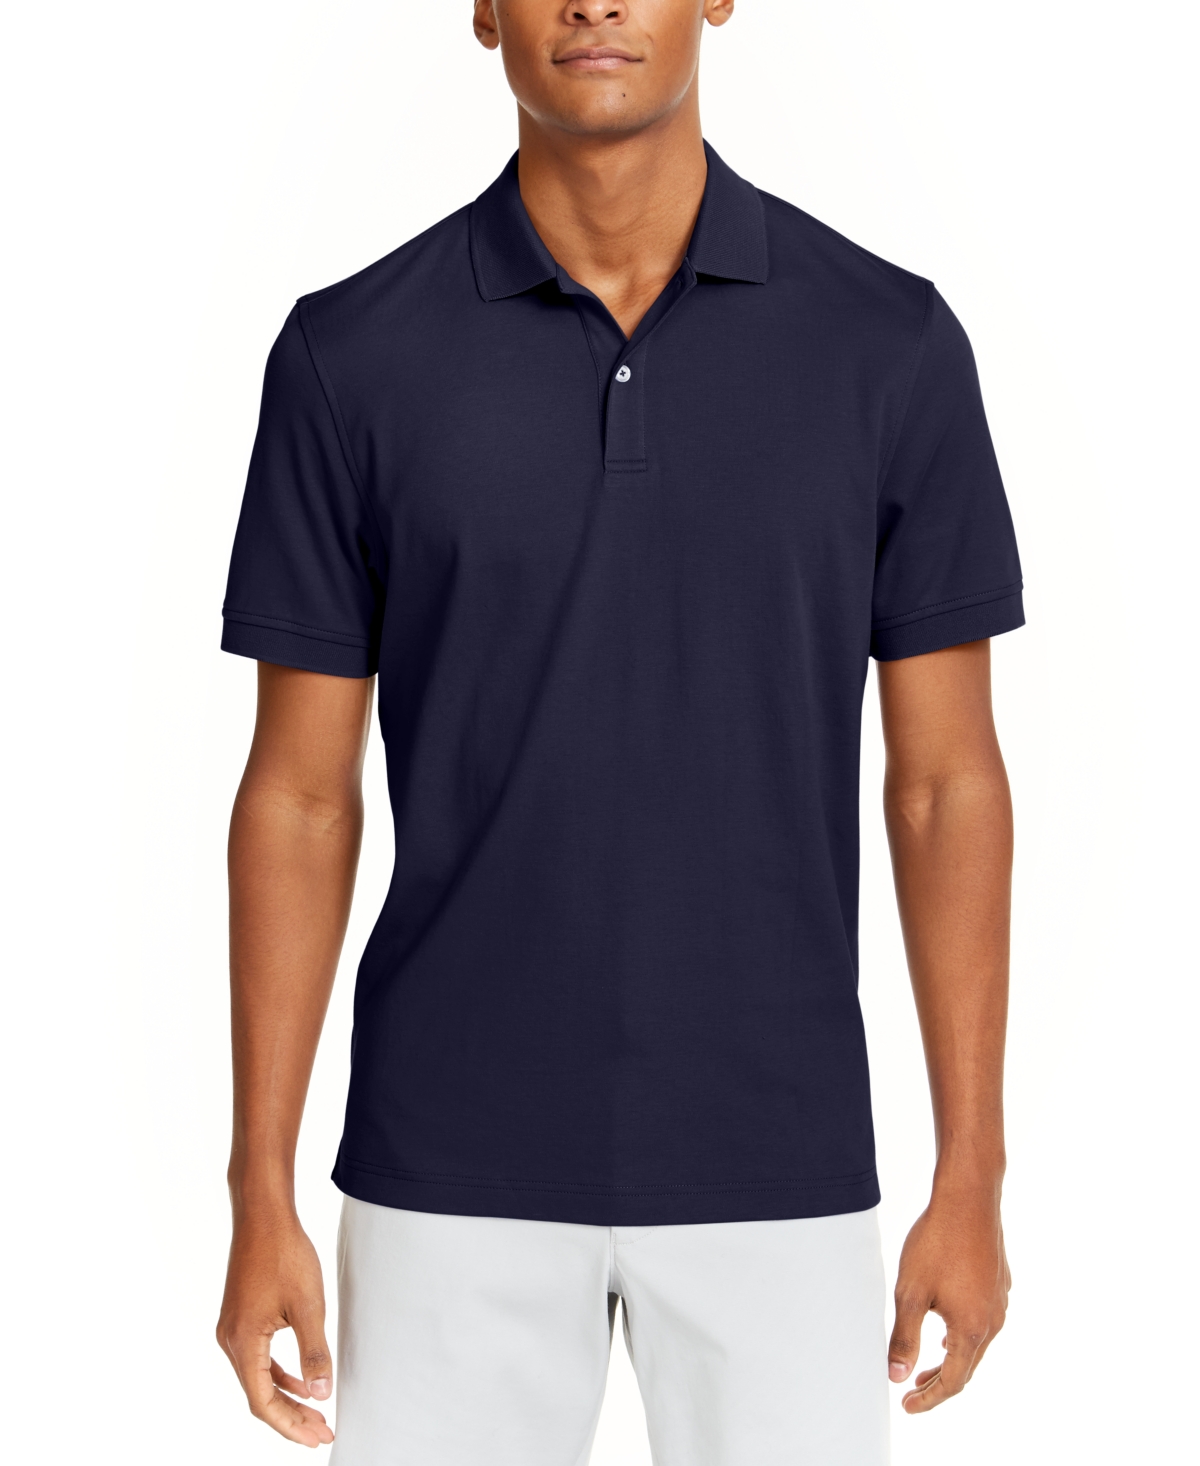 Men's Soft Touch Interlock Polo, Created for Macy's - Sunwash Yellow